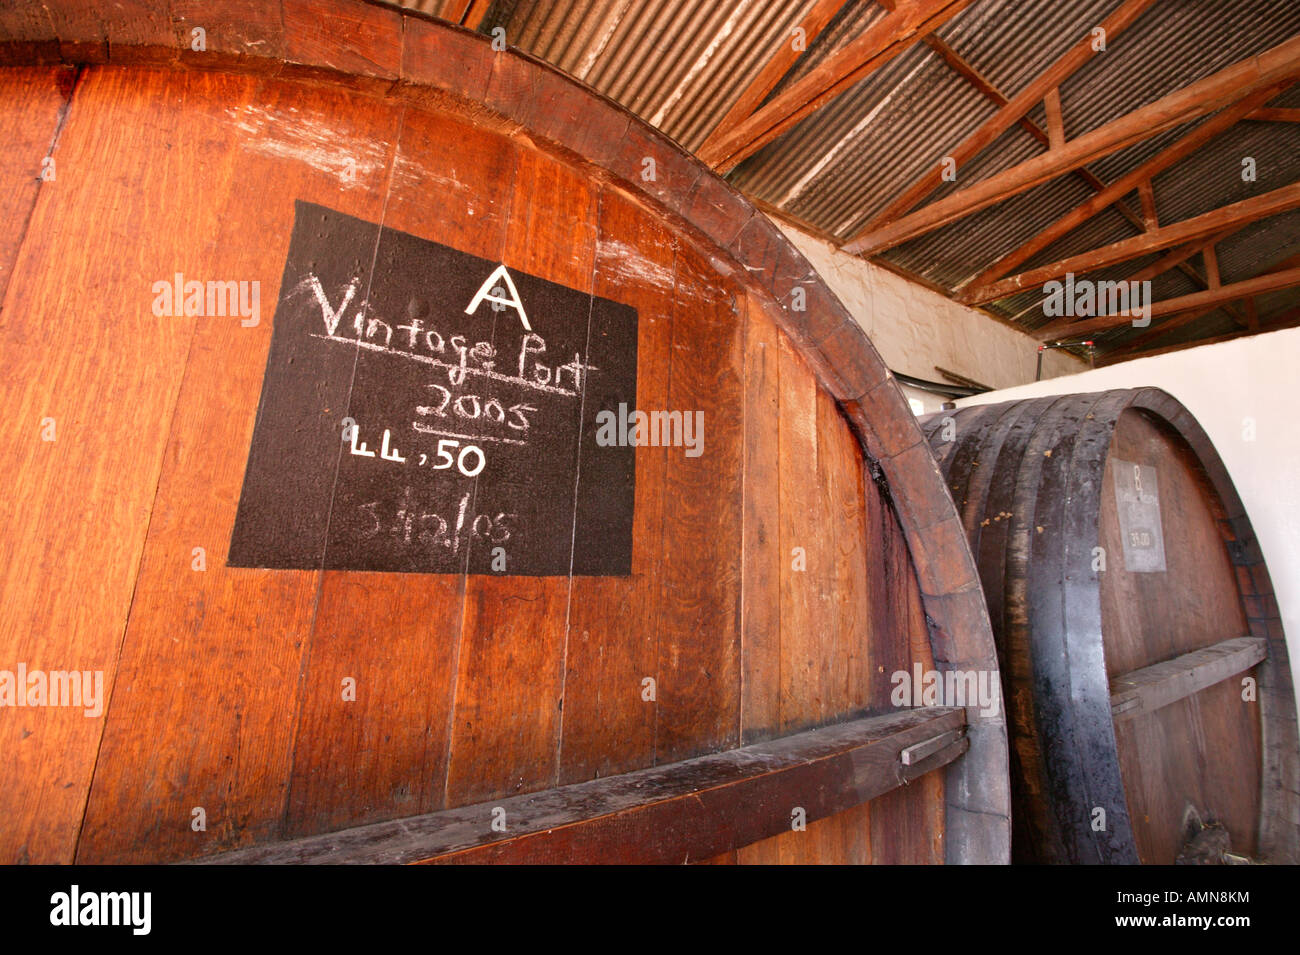 Large wooden vats in which vintage port is being matured Stock Photo